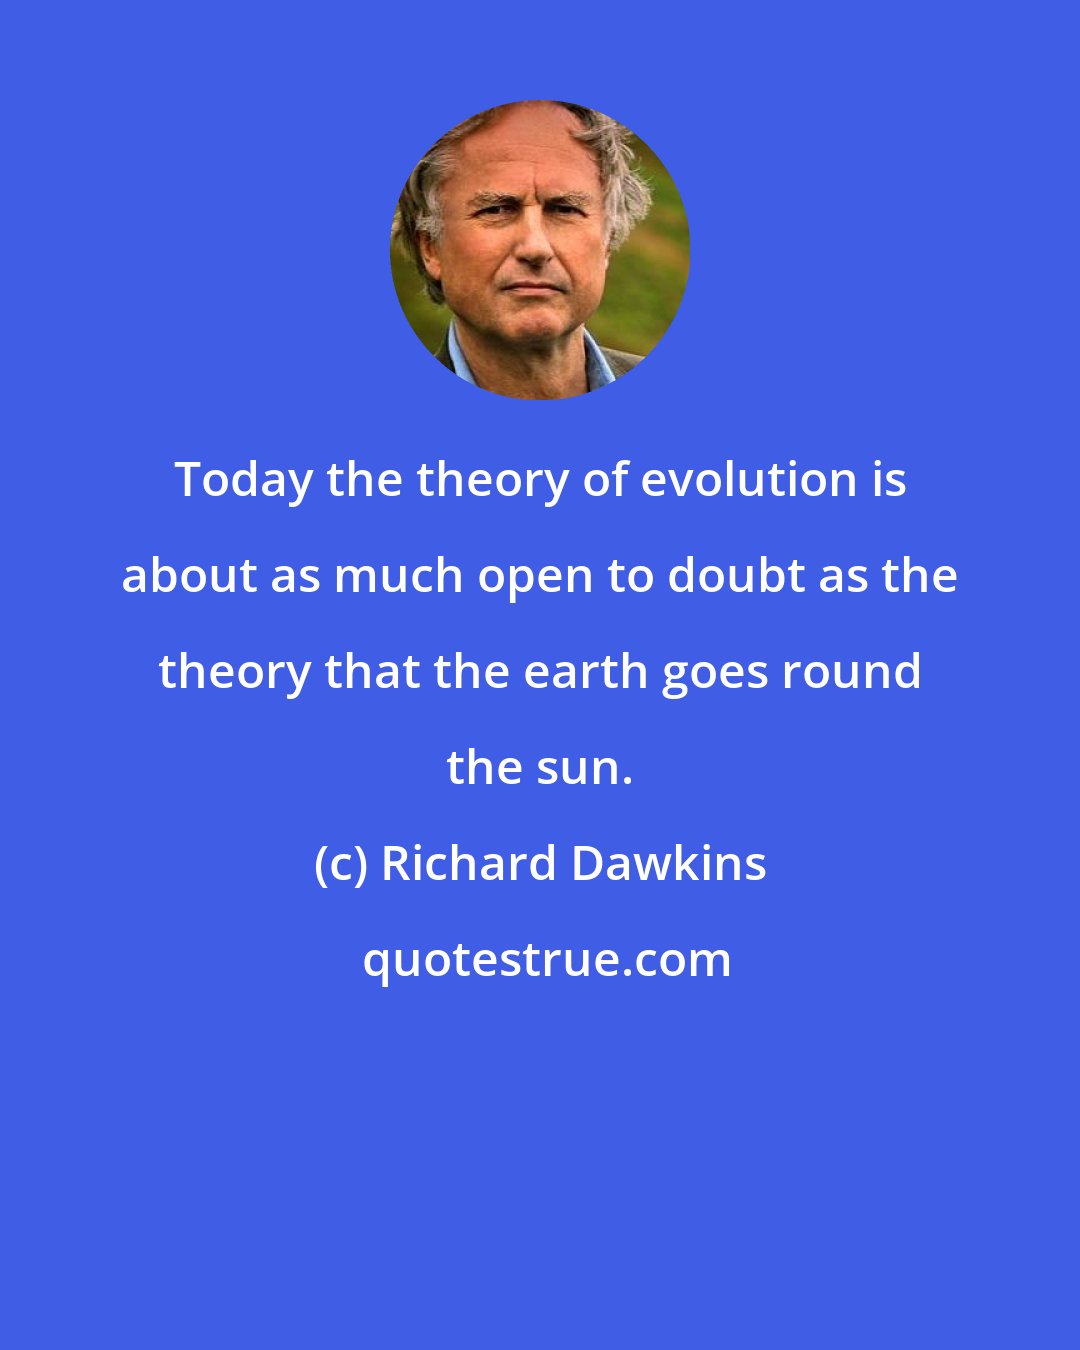 Richard Dawkins: Today the theory of evolution is about as much open to doubt as the theory that the earth goes round the sun.